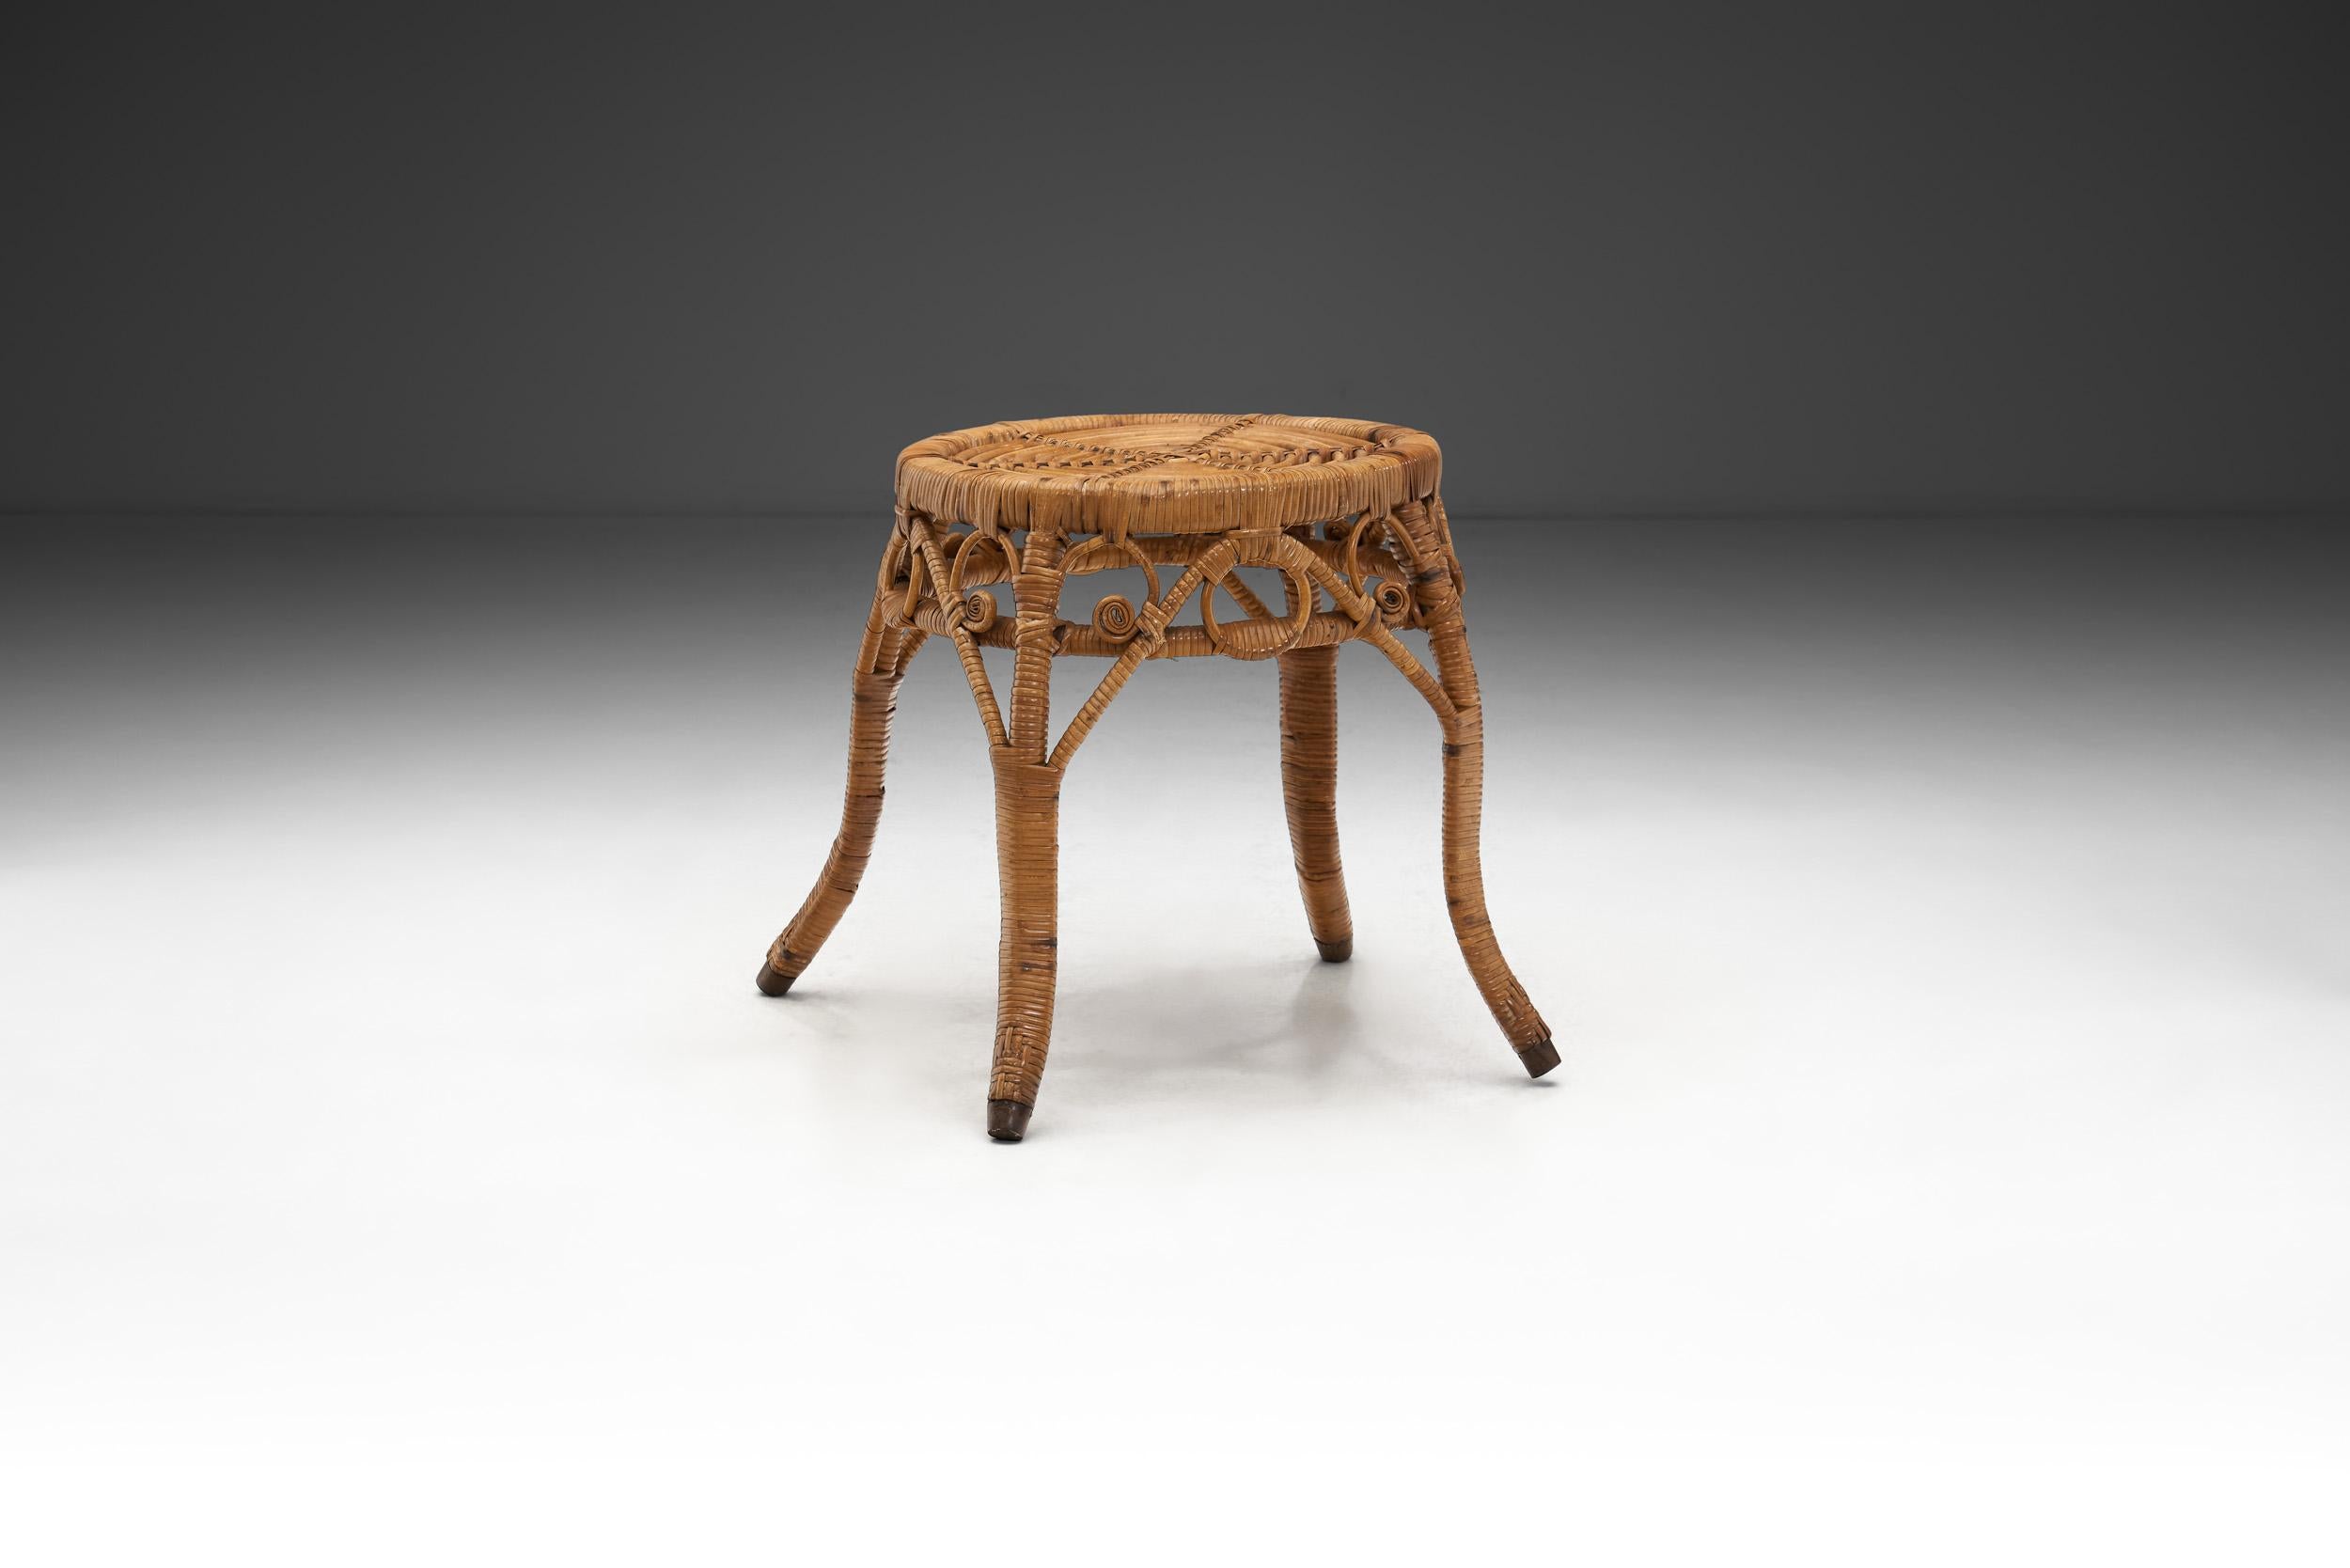 Woven Rattan Stool, Europe Early 20th Century In Good Condition For Sale In Utrecht, NL